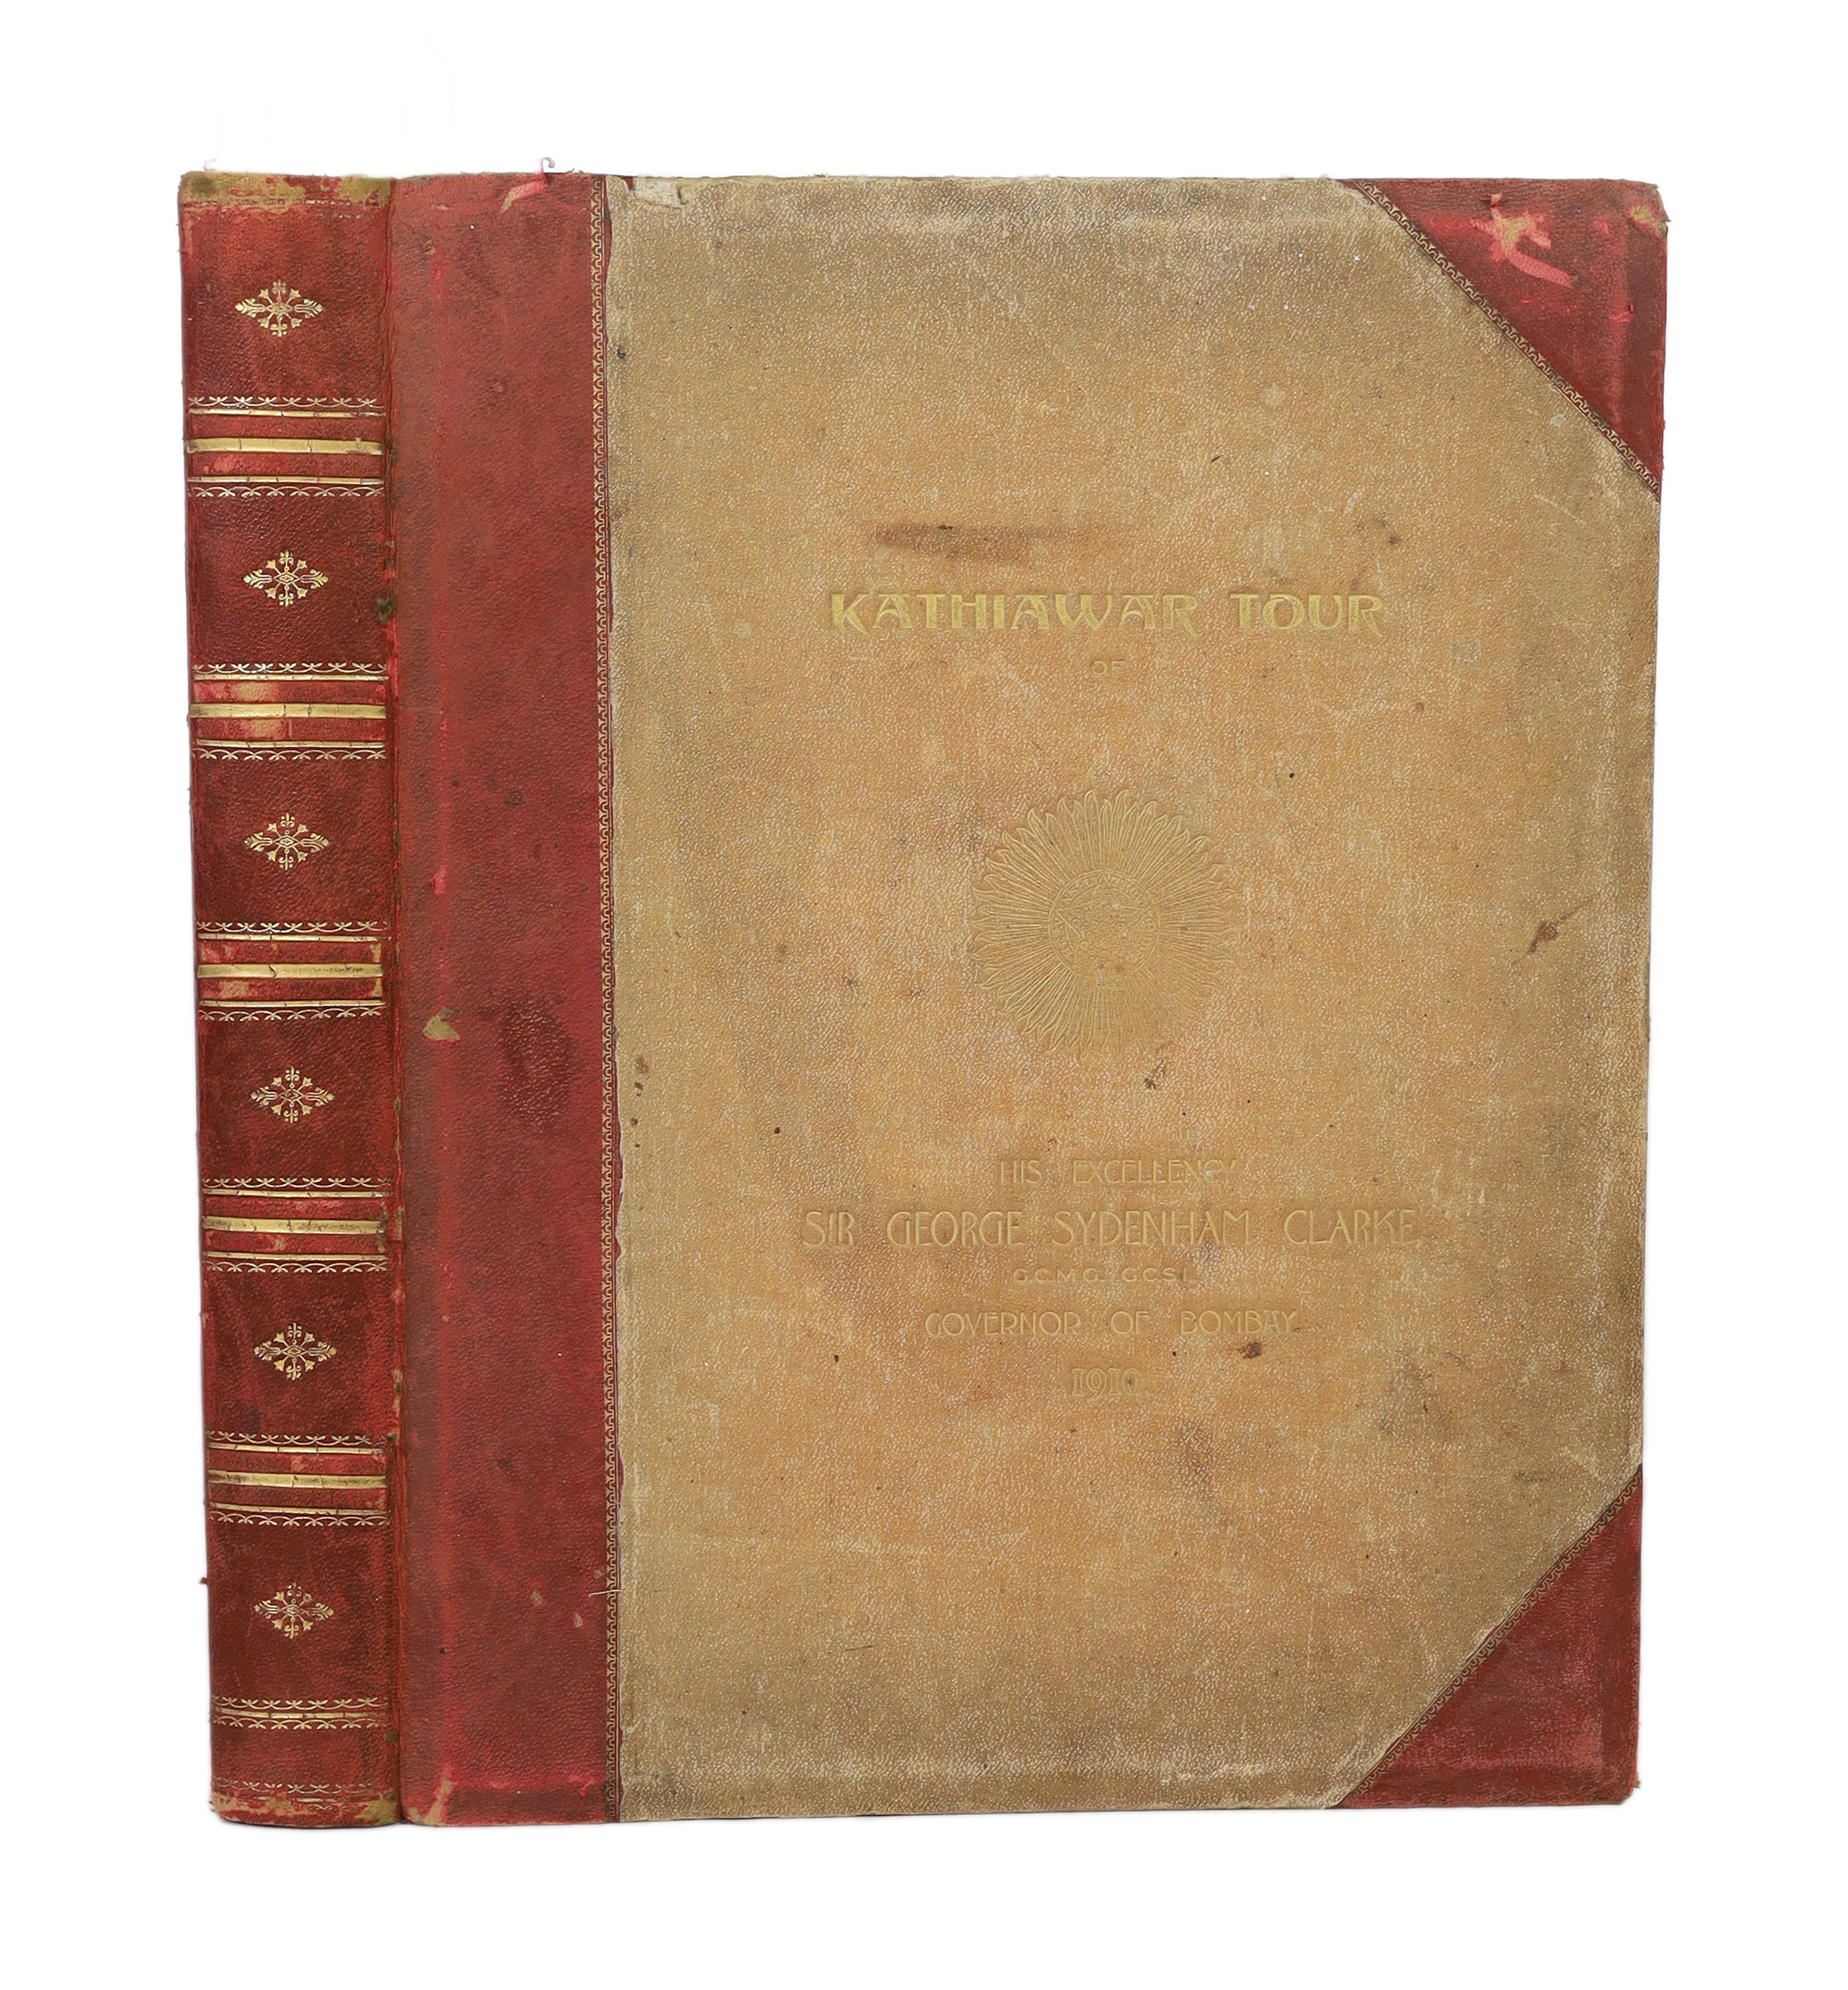 Indian Interest: CAXTON WORKS. Souvenir. 'Kathiawar Tour of His Excellency Sir George Sydenham Clarke, Governor of Bombay, 1910', a leather bound album of photographs by Bourne & Shepherd, presentation copy to Sir Willia